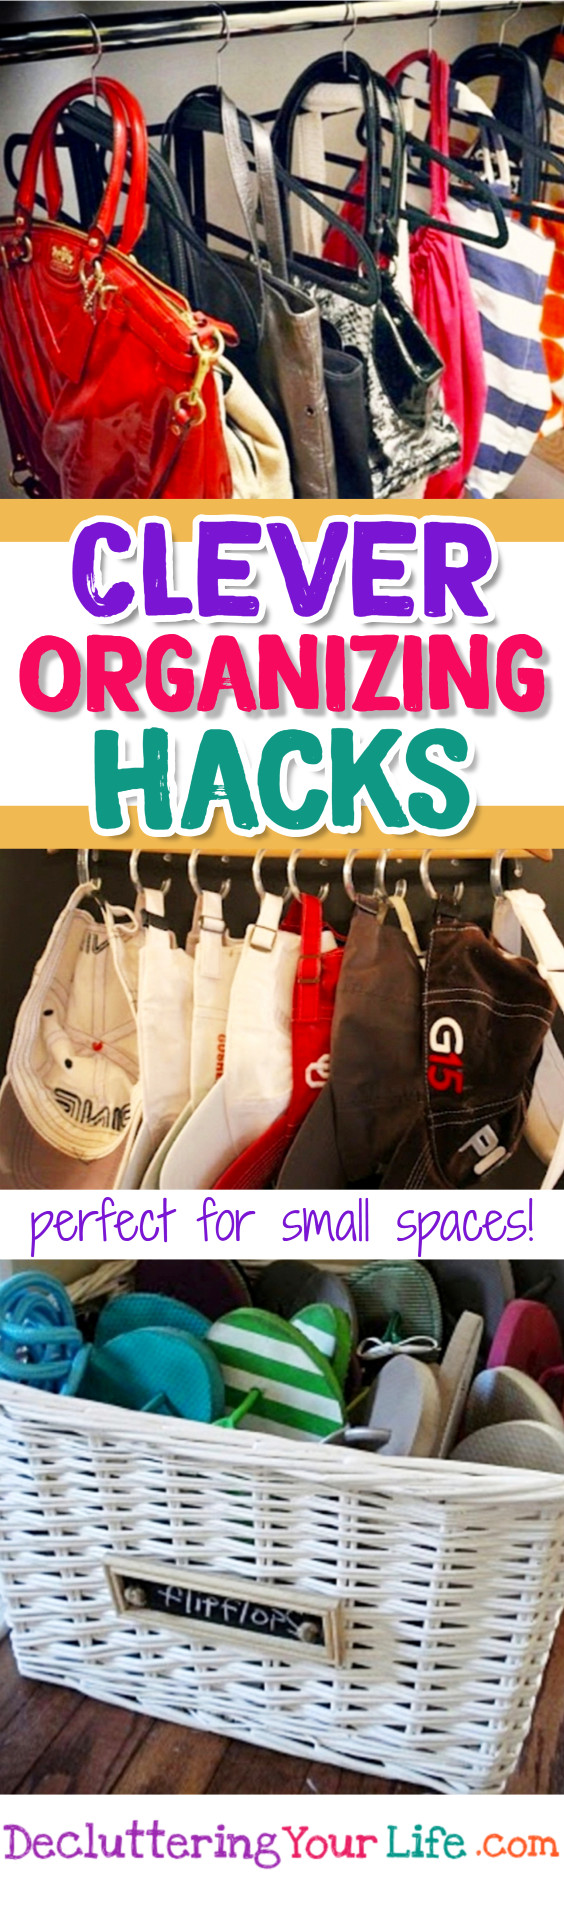 Organizing Hacks Tips and Tricks for Small Spaces - Easy DIY organizing hacks and organization ideas 